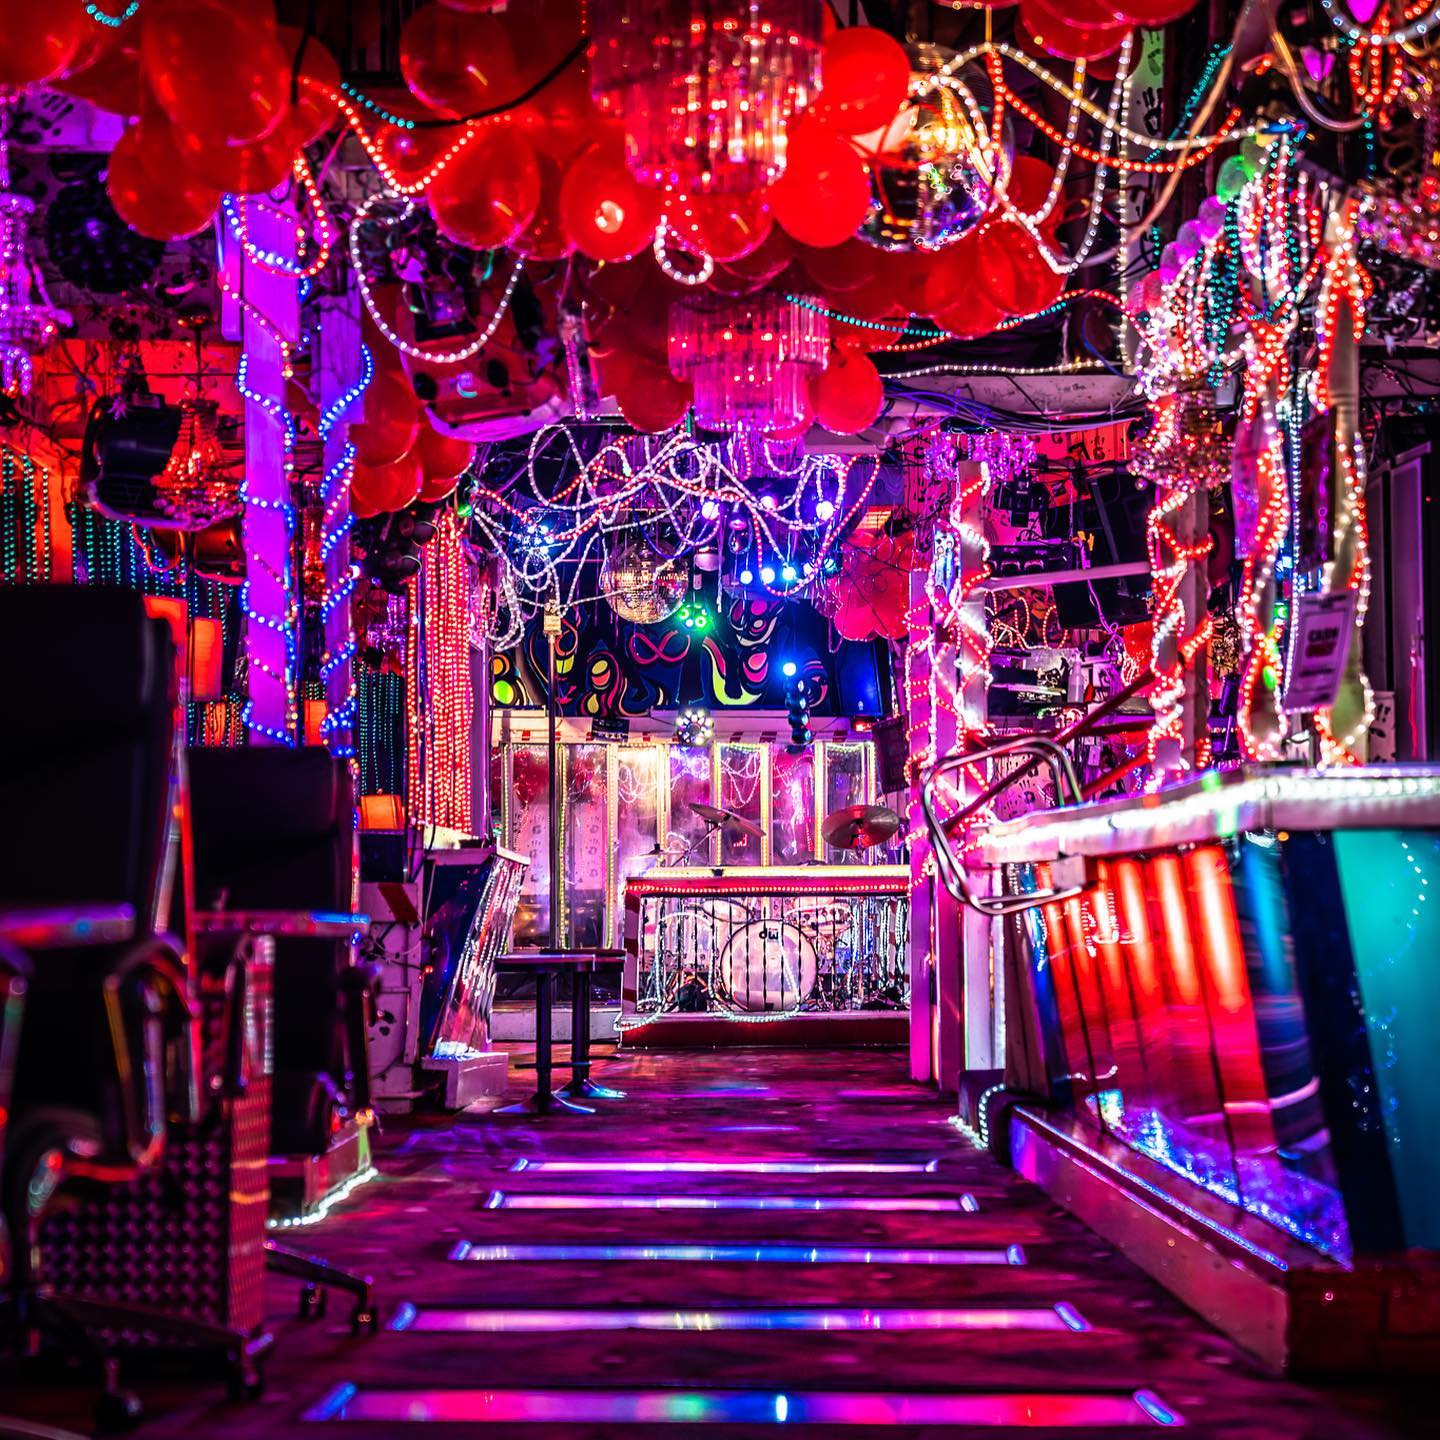 Photo of Paula and Raiford's Disco bar with neon lights, illuminated bar, drum set, and red balloons and disco ball on the ceiling. Photo by Instagram user @darrellderosia